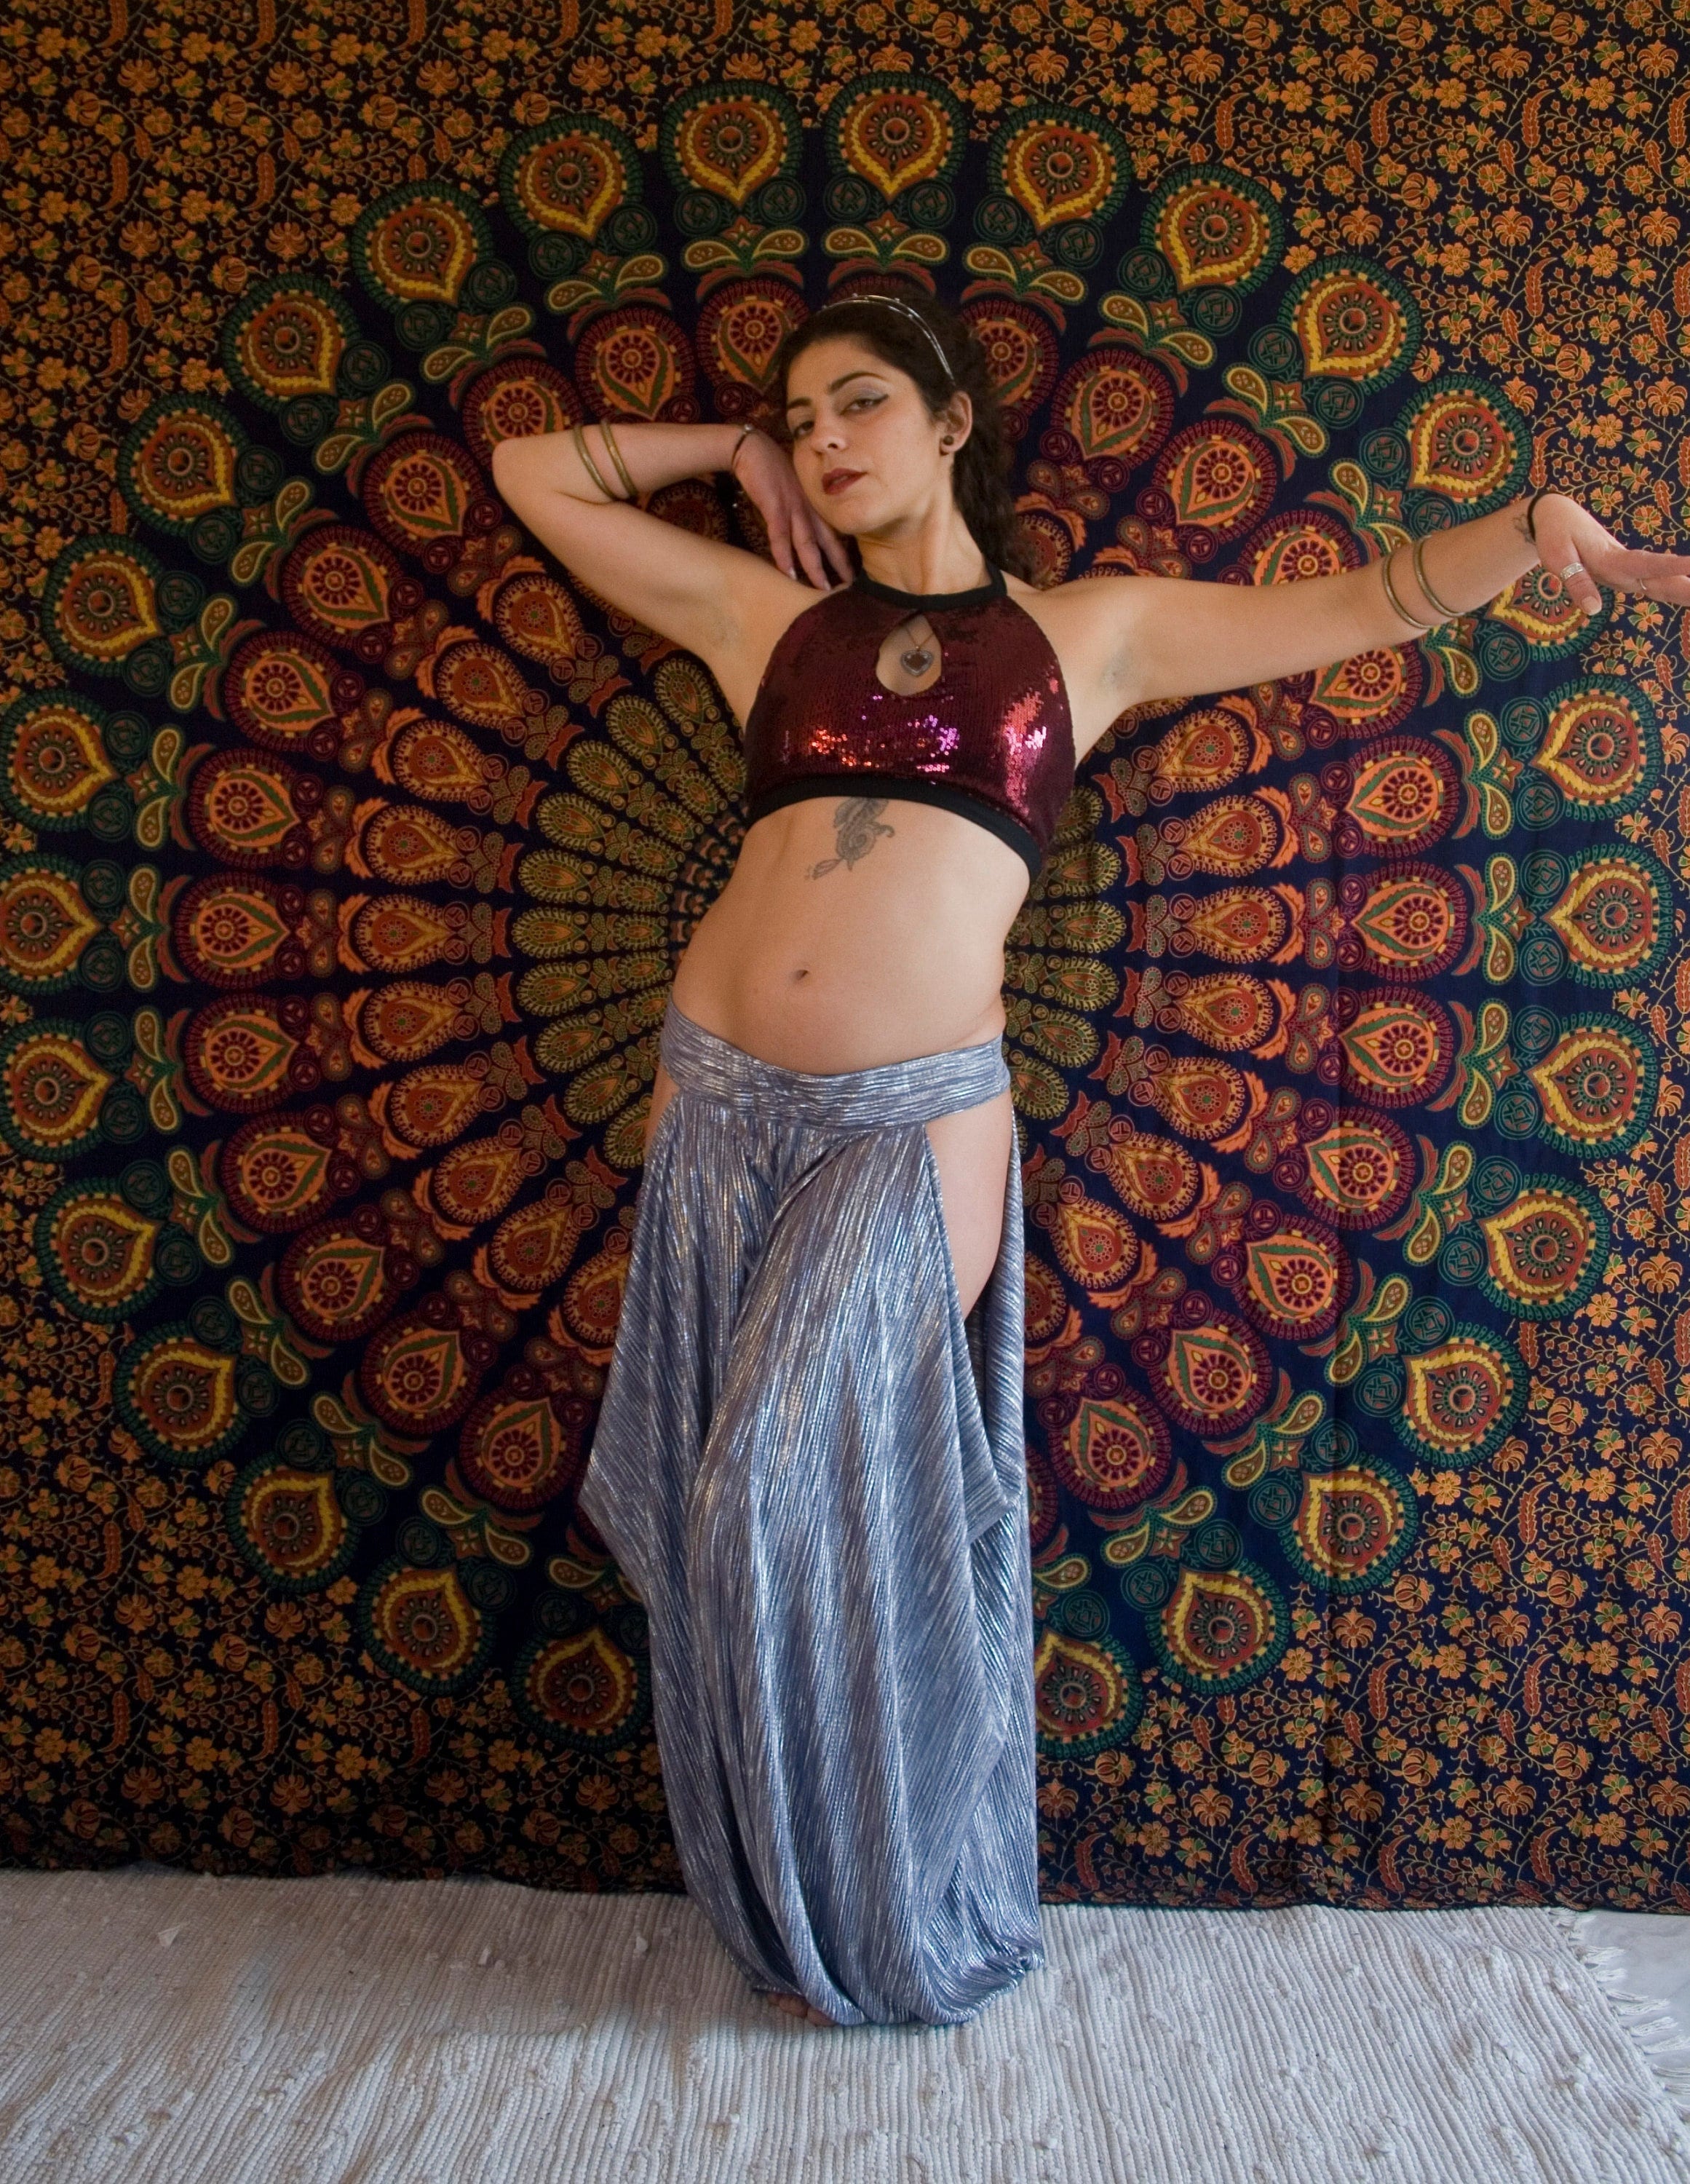 Belly Dance Pants -  Canada